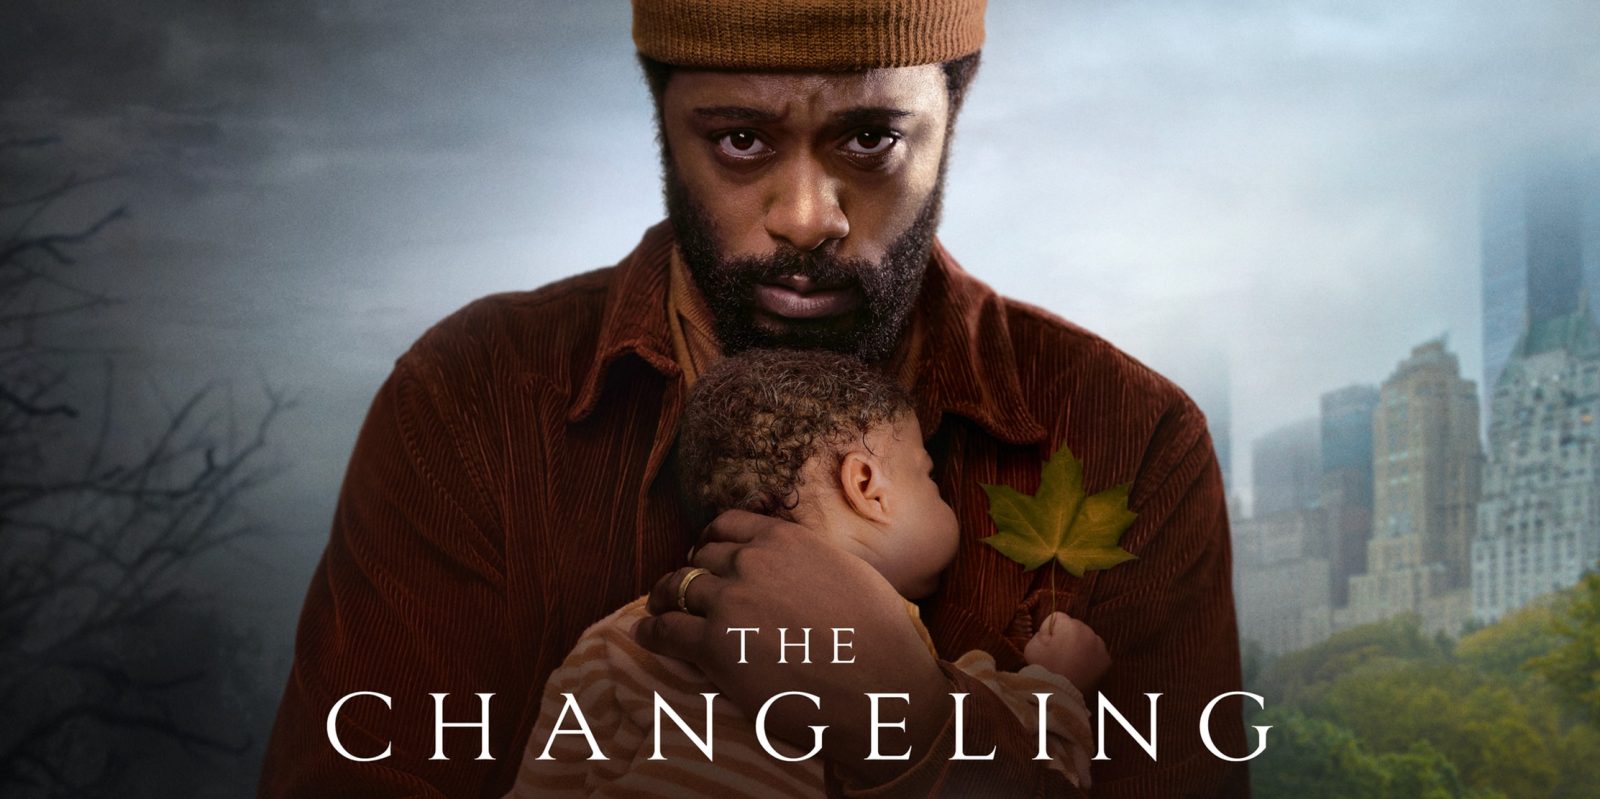 How to watch The Changeling, starring LaKeith Stanfield News Headlines